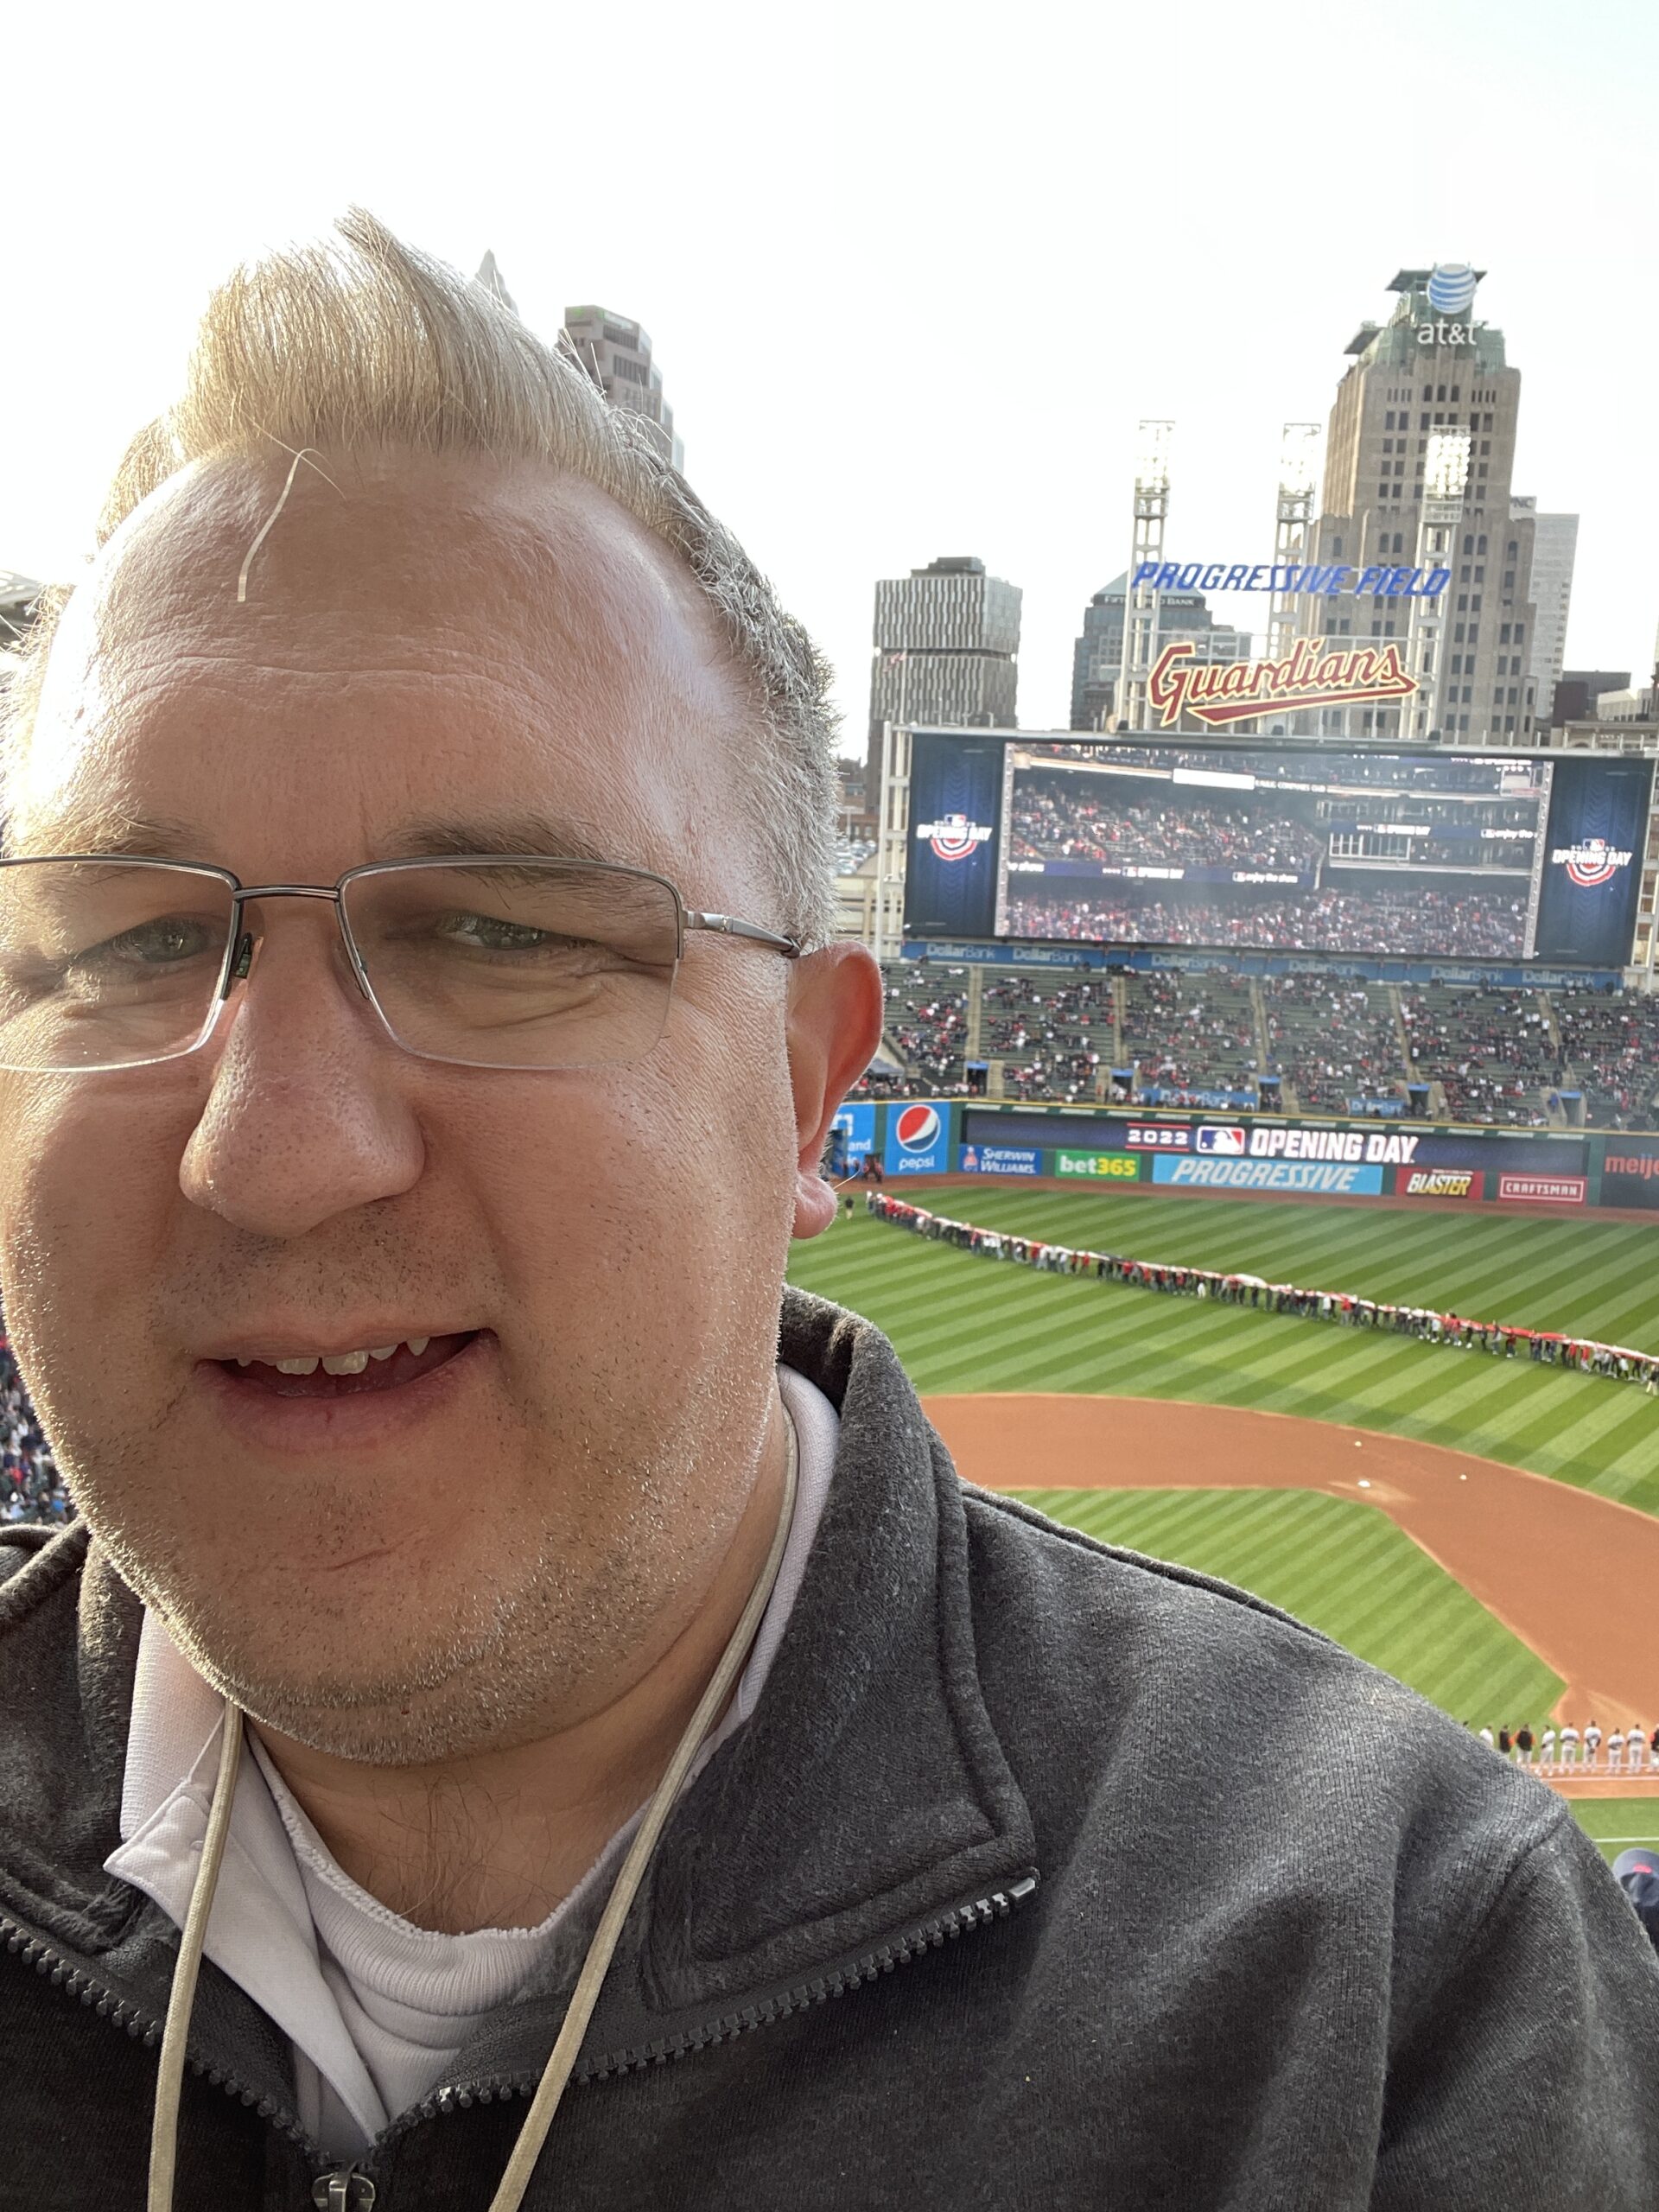 A selfie of me with the Progressive field scoreboard and field in the background